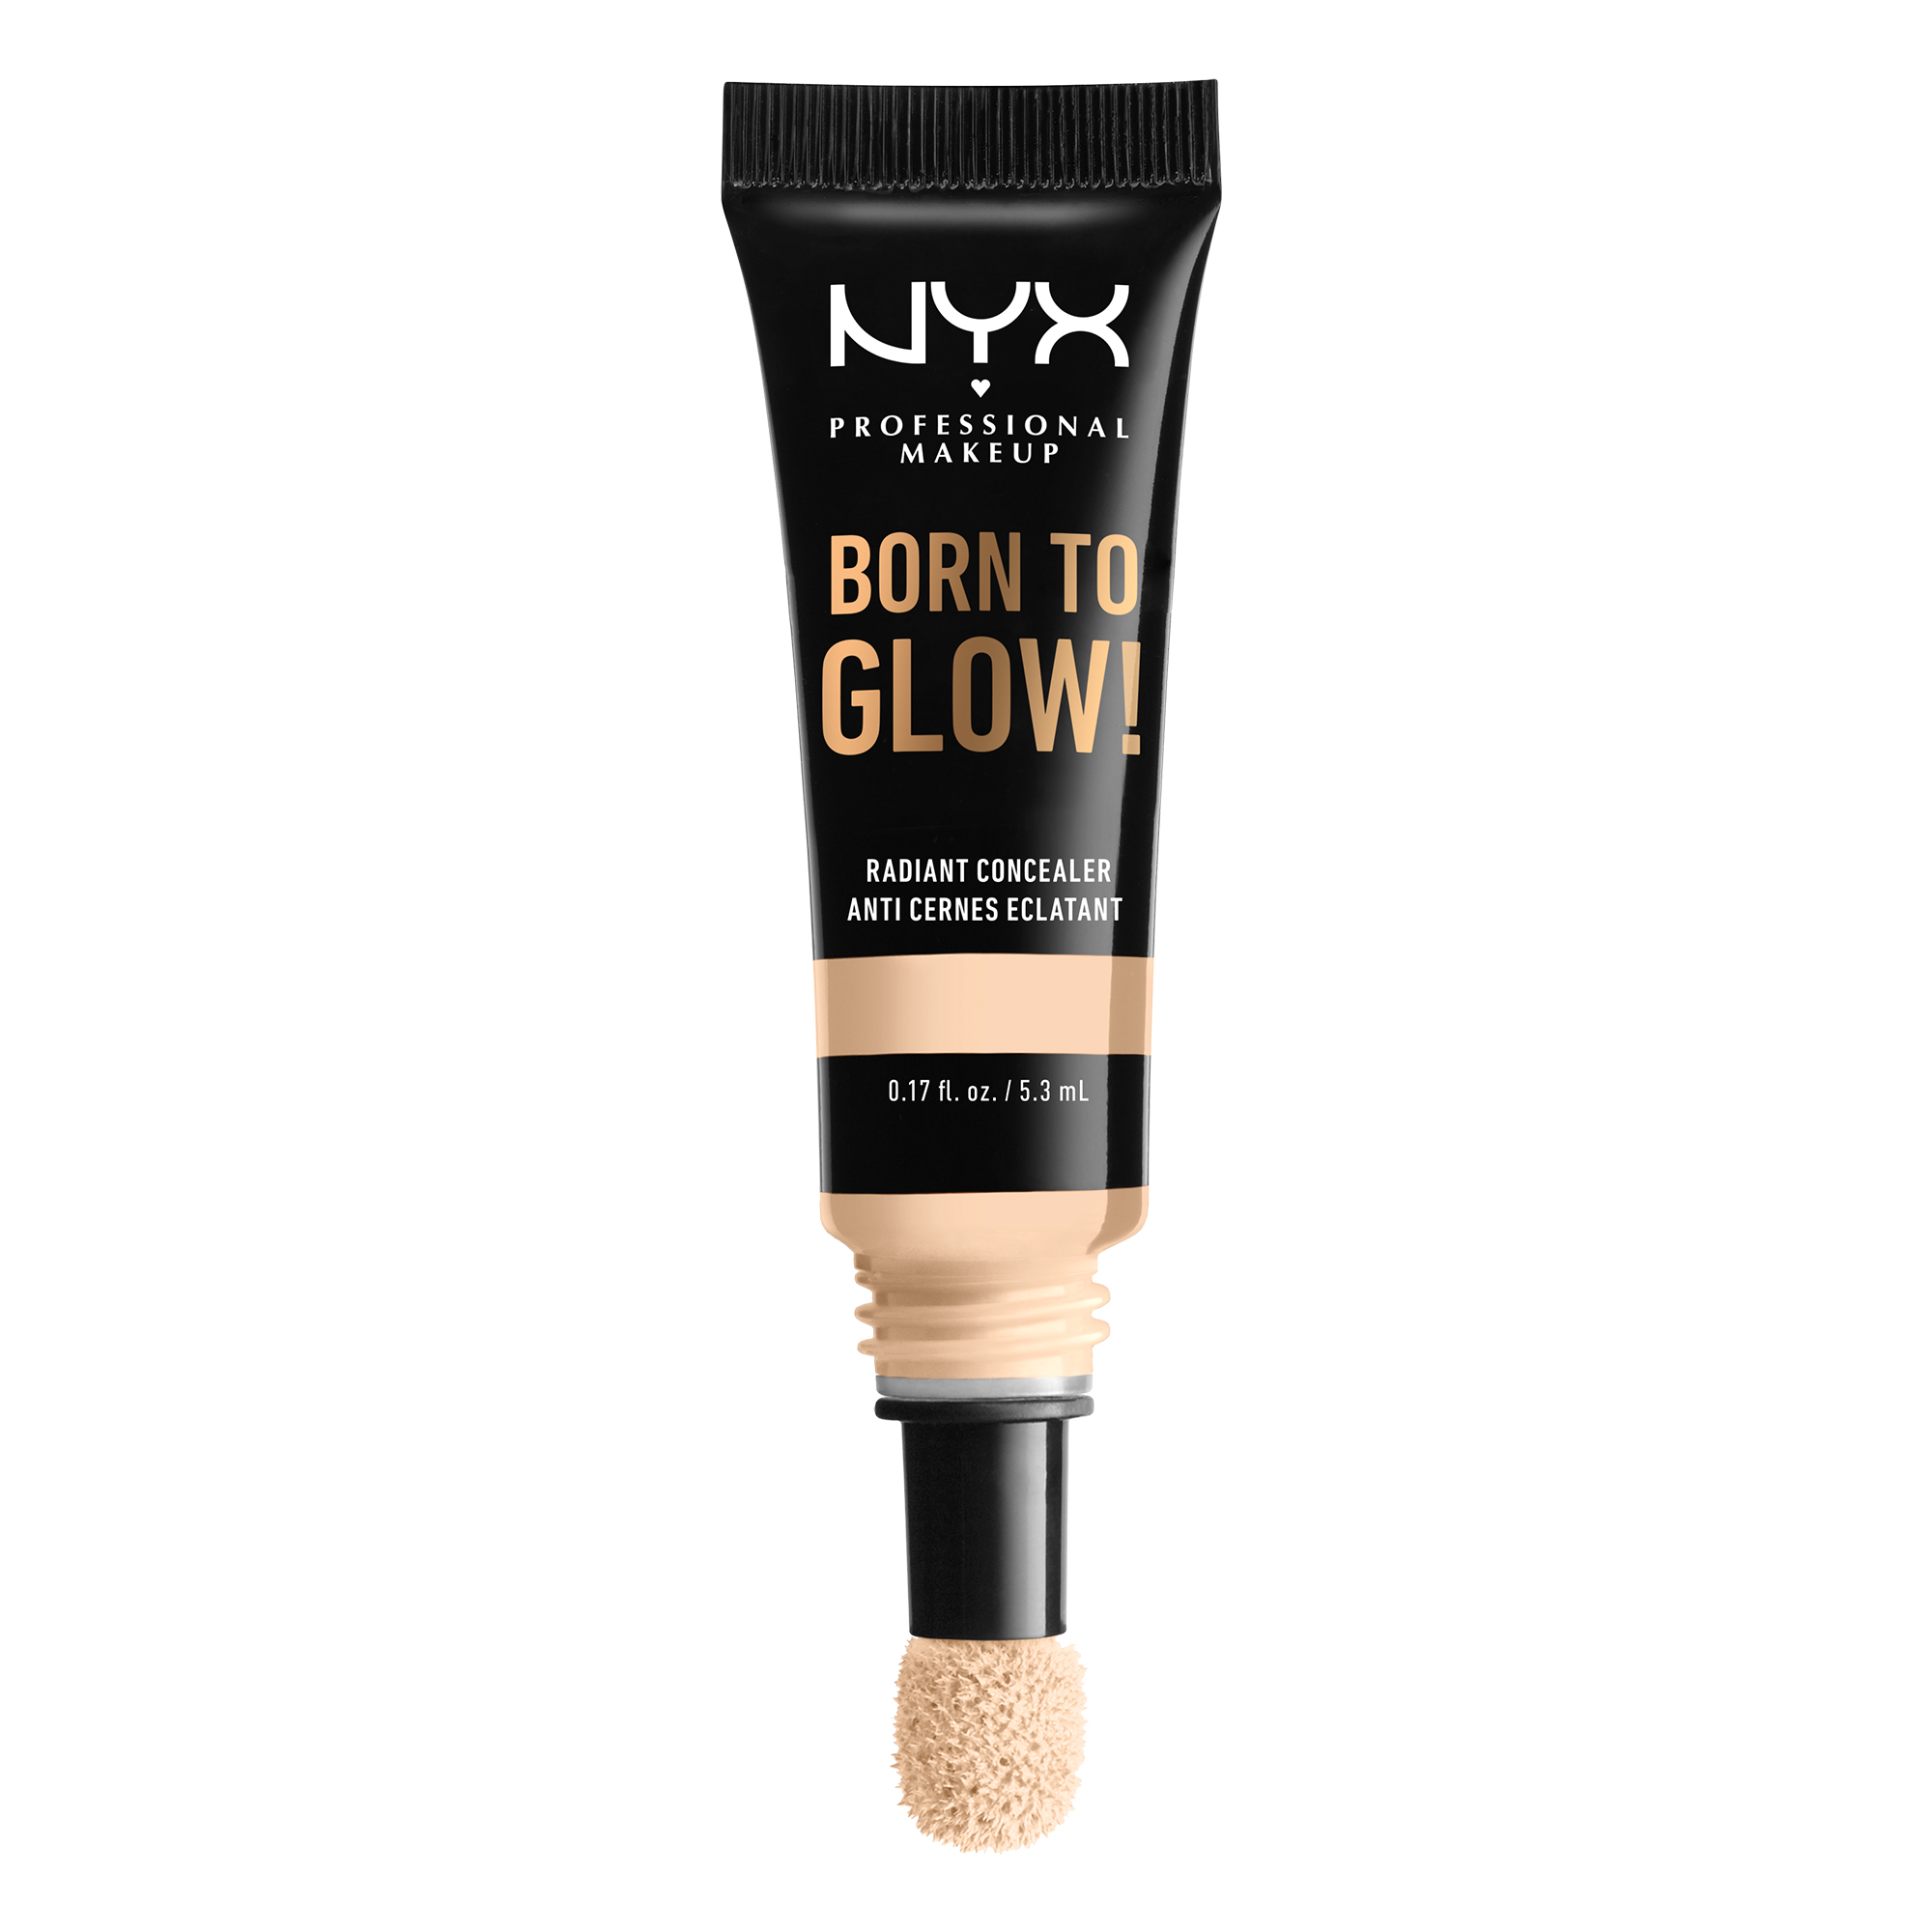 NYX Professional Makeup Born To Glow Radiant Undereye Concealer, Pale - image 4 of 5